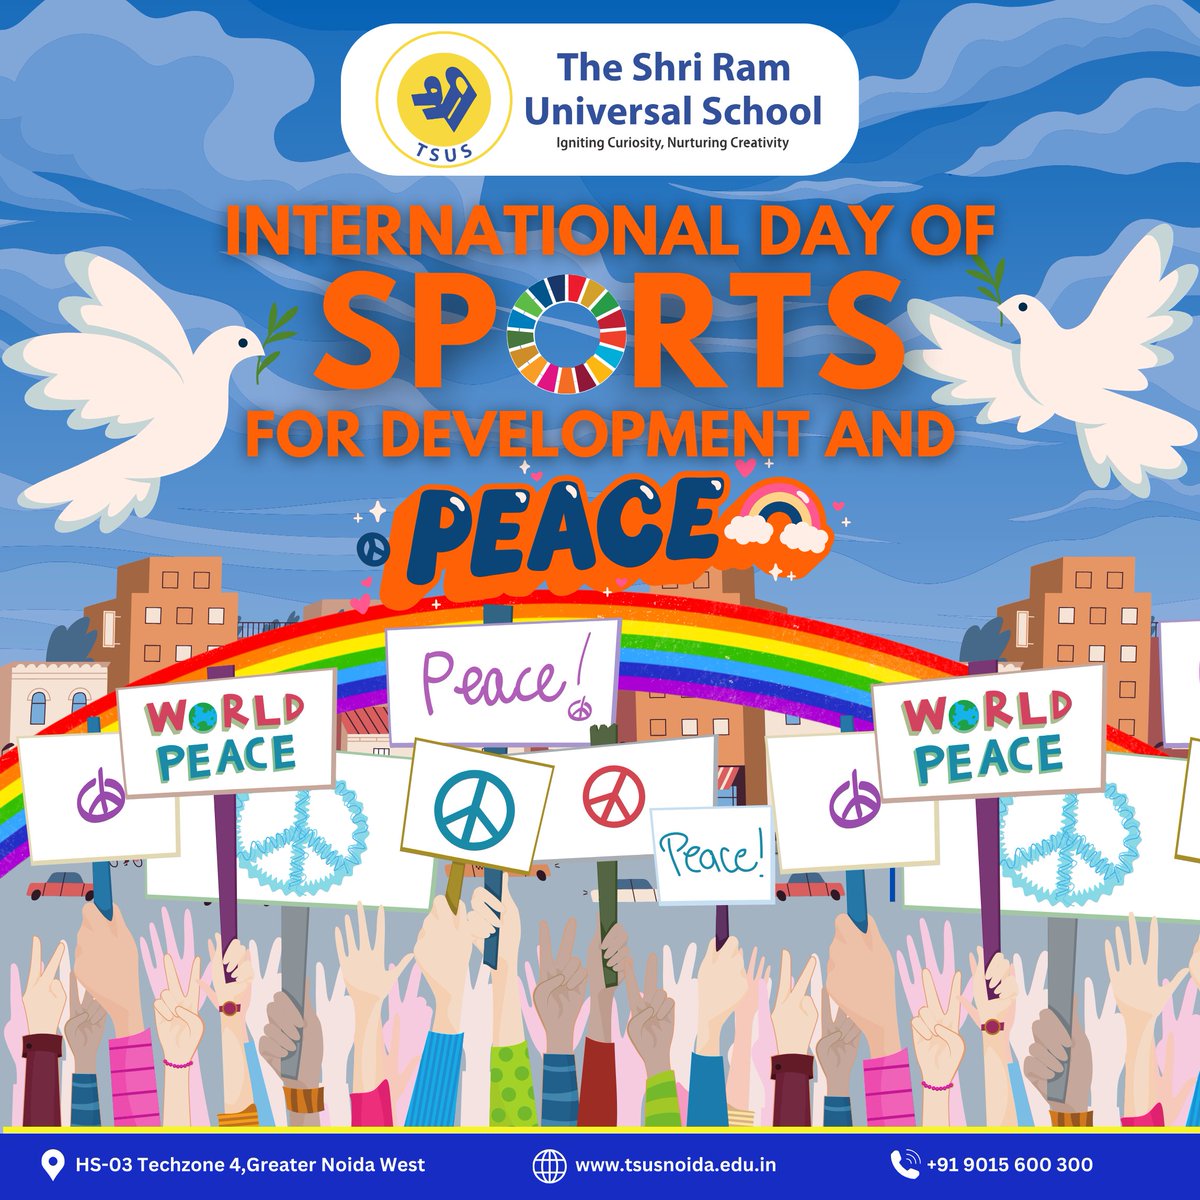 Happy International Day of Sports for Development and Peace! 🌍🏅 Let's celebrate the power of sports to unite communities, promote peace, and drive positive change worldwide. Play on, together! #IDSDP #sport4sdgs🏅 #TheShriRamUniversalSchool #greaternoidawest #greaternoida